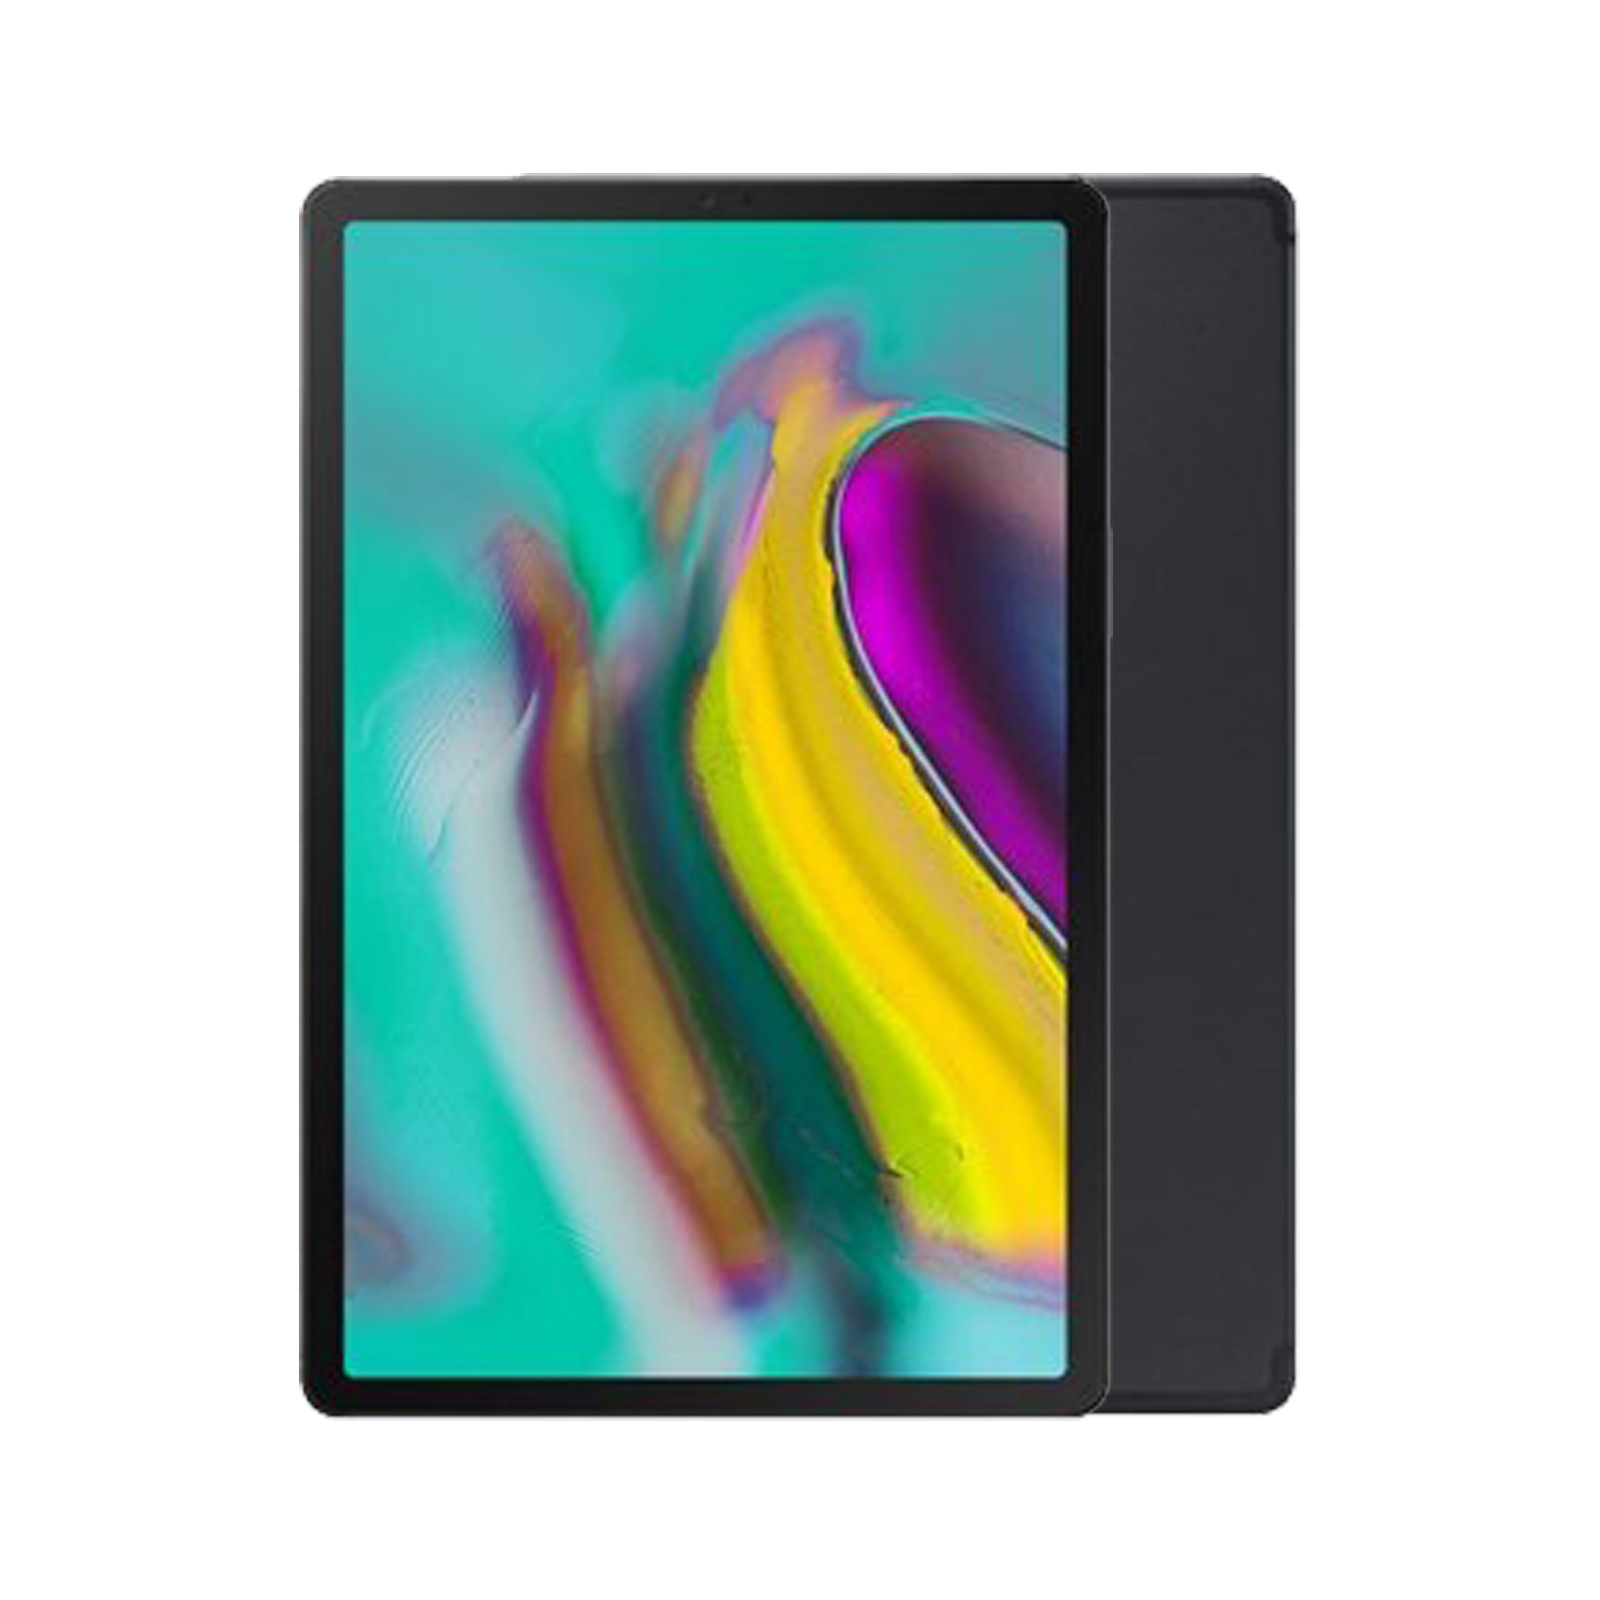 Samsung Galaxy Tab S5e 10.5 [Wi-Fi Only] Only] [128GB] [Black] [As New]